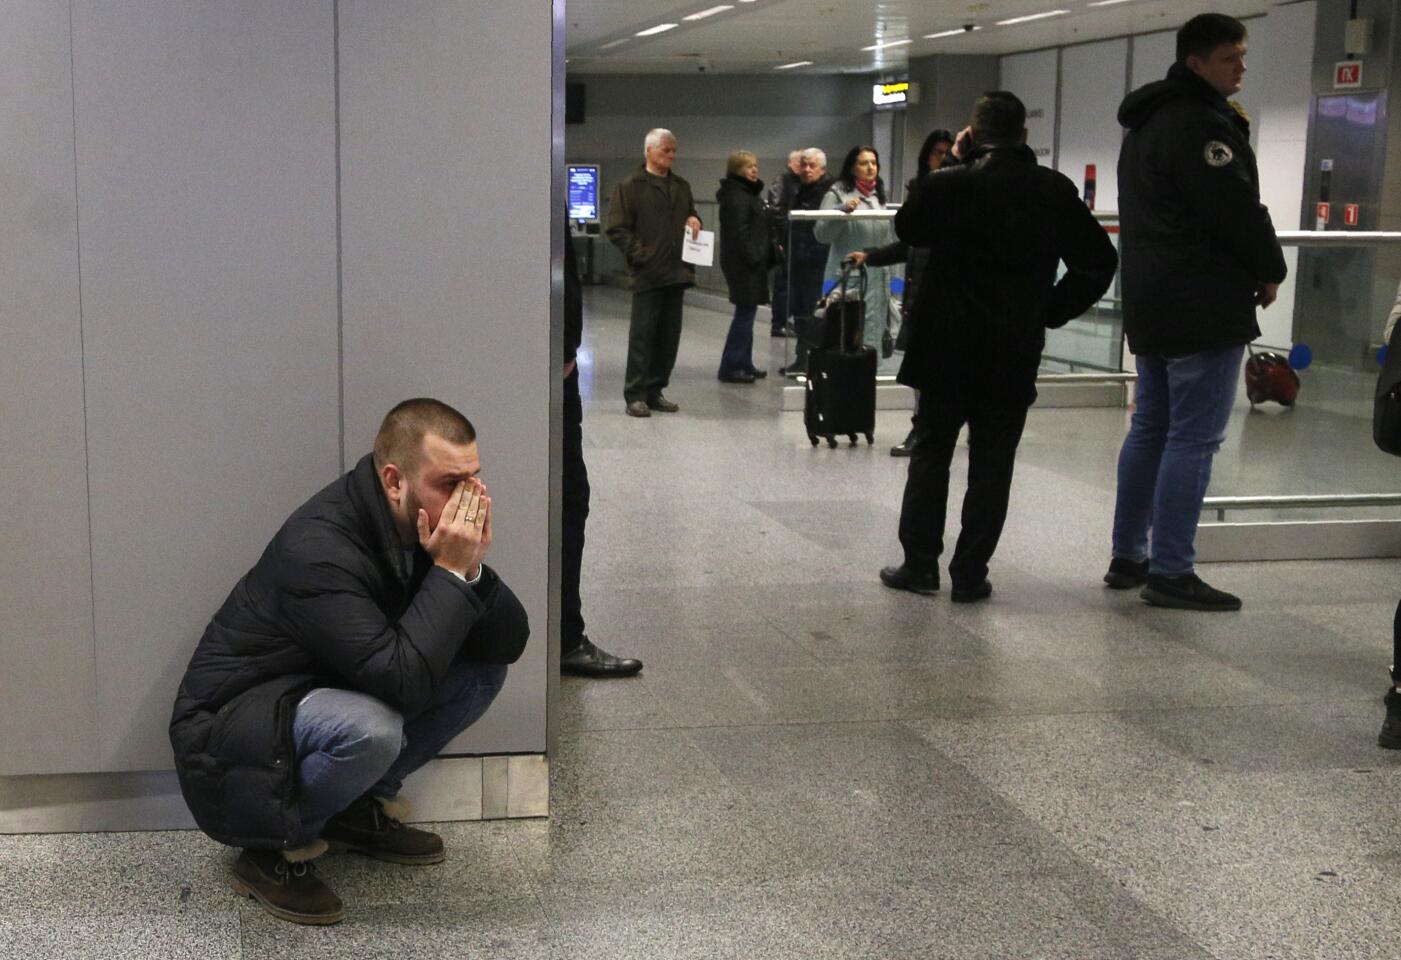 A relative of a flight stewardess on the ill-fated Ukraine-bound flight reacts to the news at an airport outside Kyiv, Ukraine, on Wednesday.